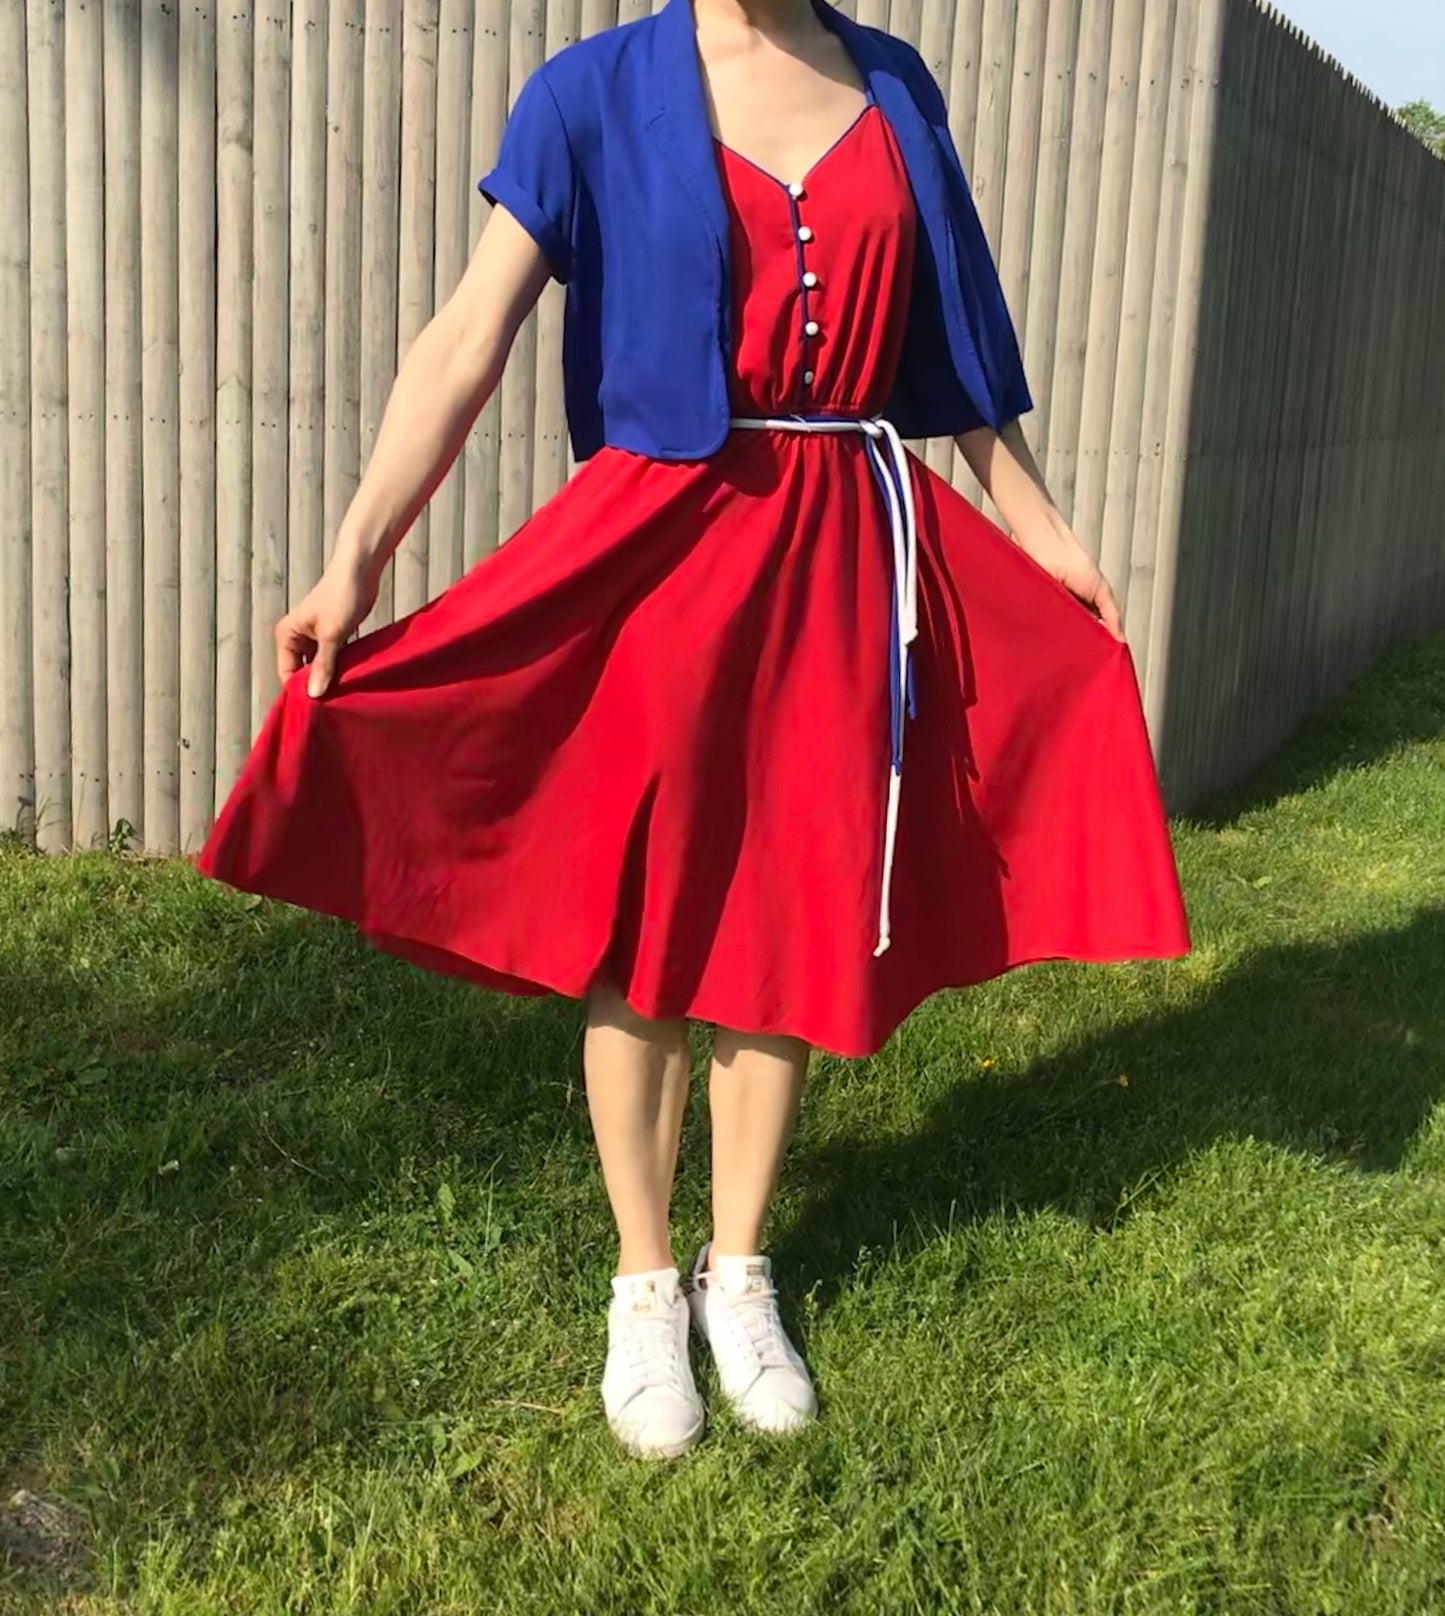 Load image into Gallery viewer, SALE Adorable Red 70s Dress w Bright Blue Piping and Matching  Blazer, Size M
